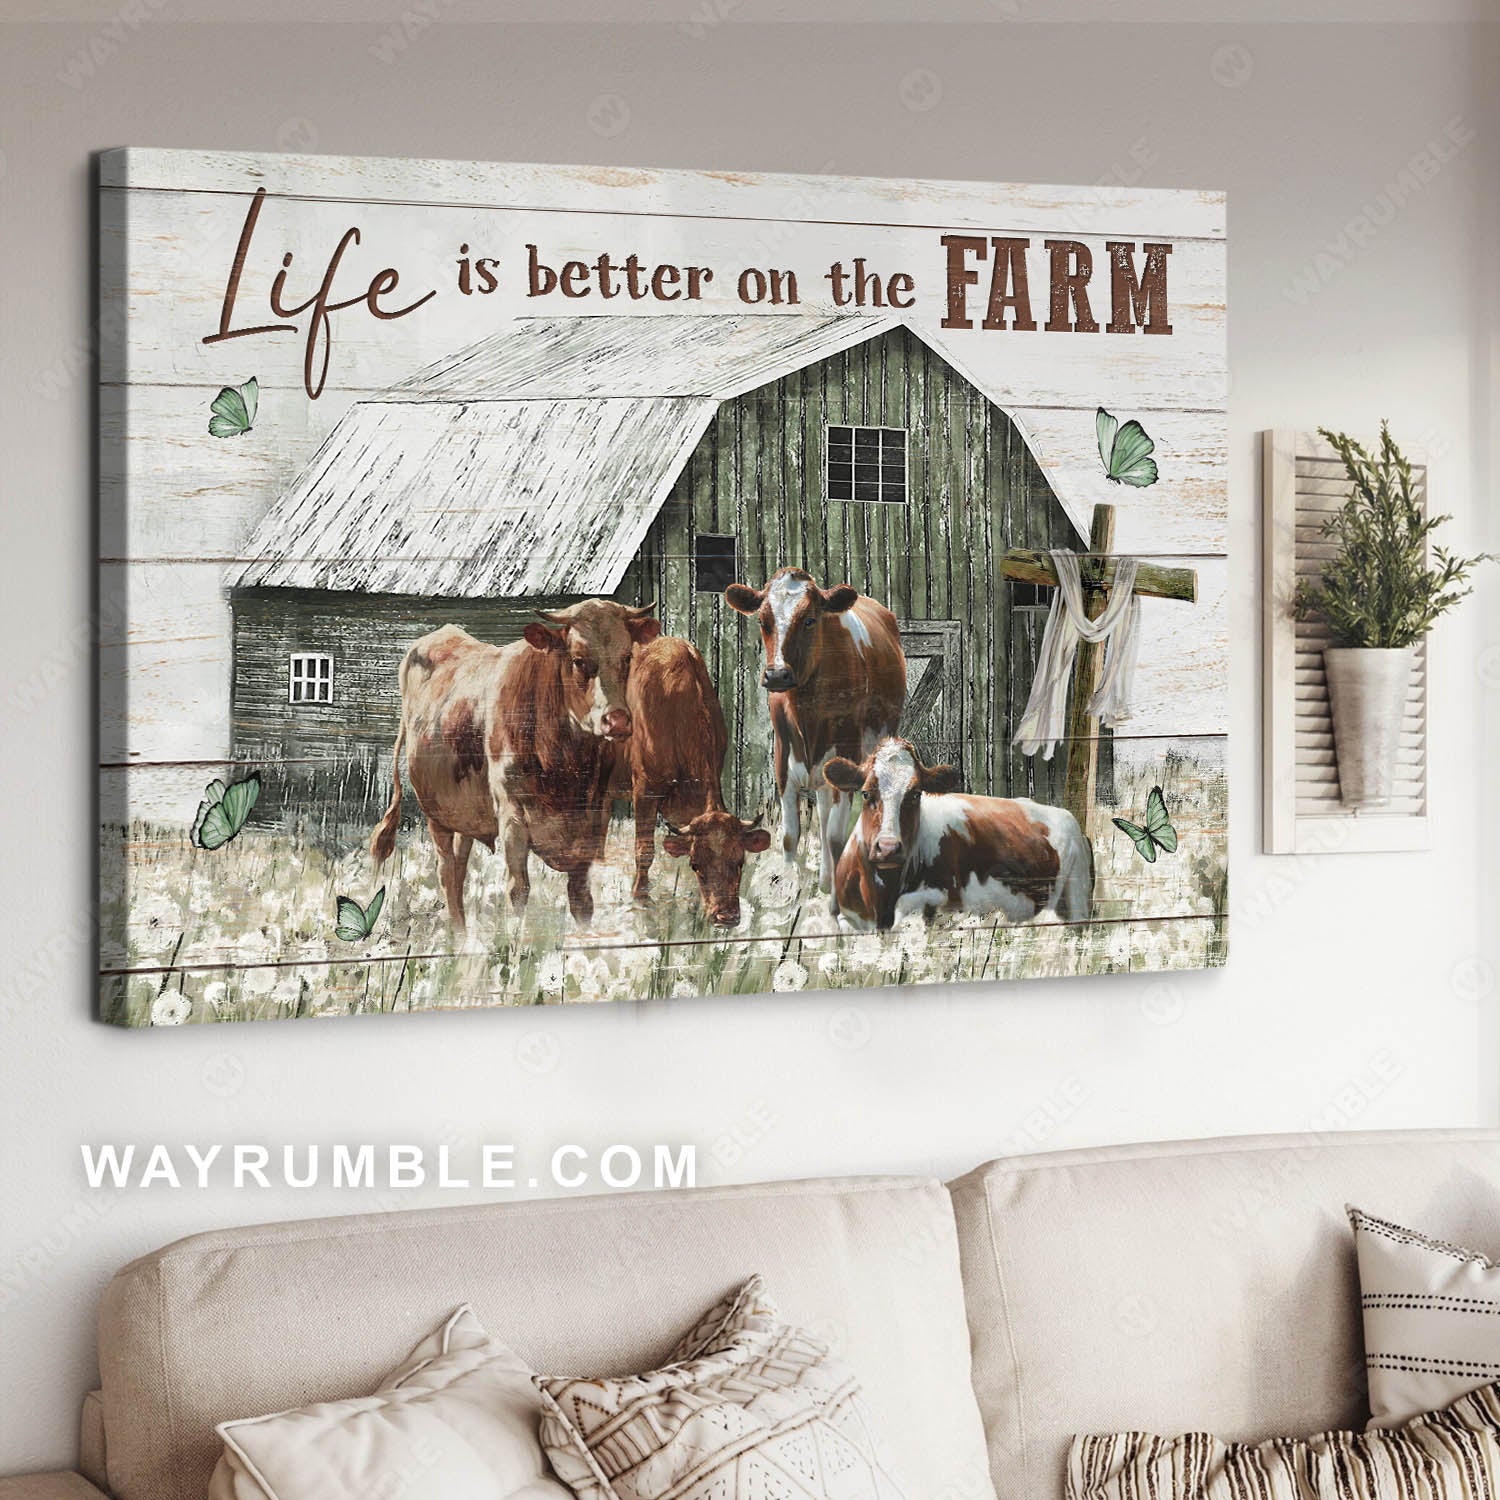 Amazing cow drawing, Dandelion field, Old barn, Life is better on the farm - Jesus Landscape Canvas Prints, Home Decor Wall Art